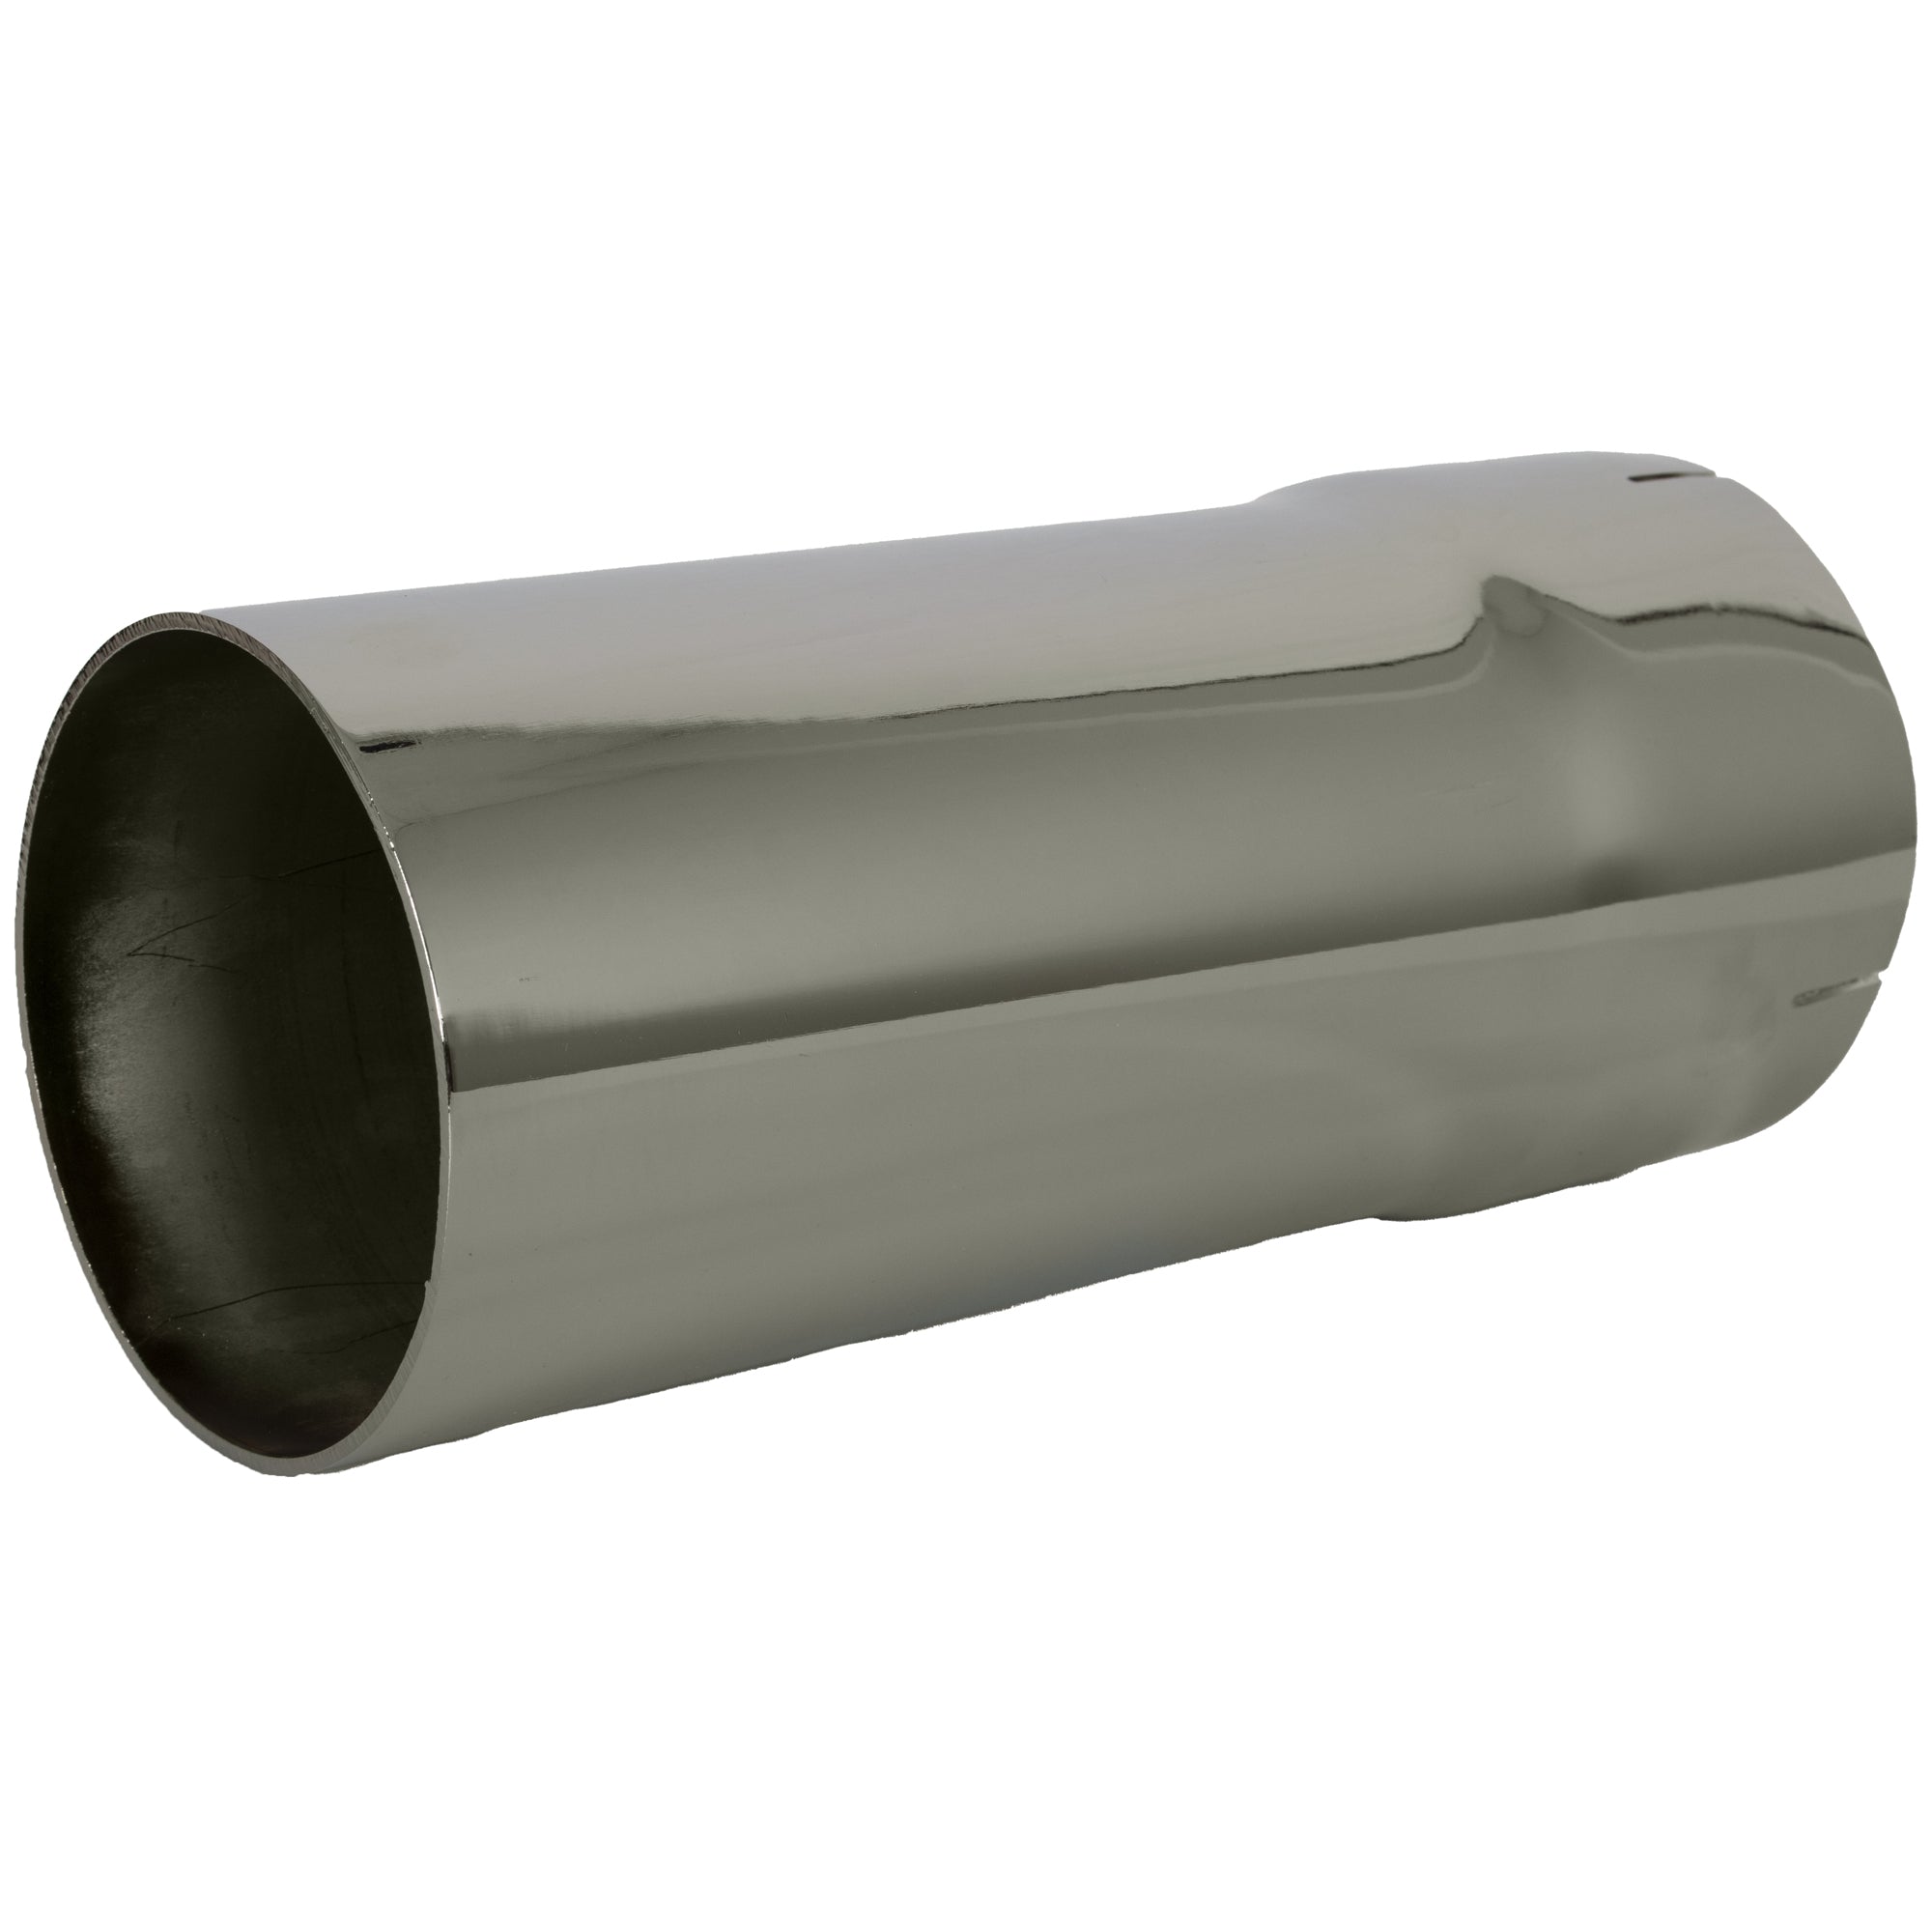 Exhaust Stack Pipe Replacement for UNIVERSAL  - 5" x 12", Straight Chrome